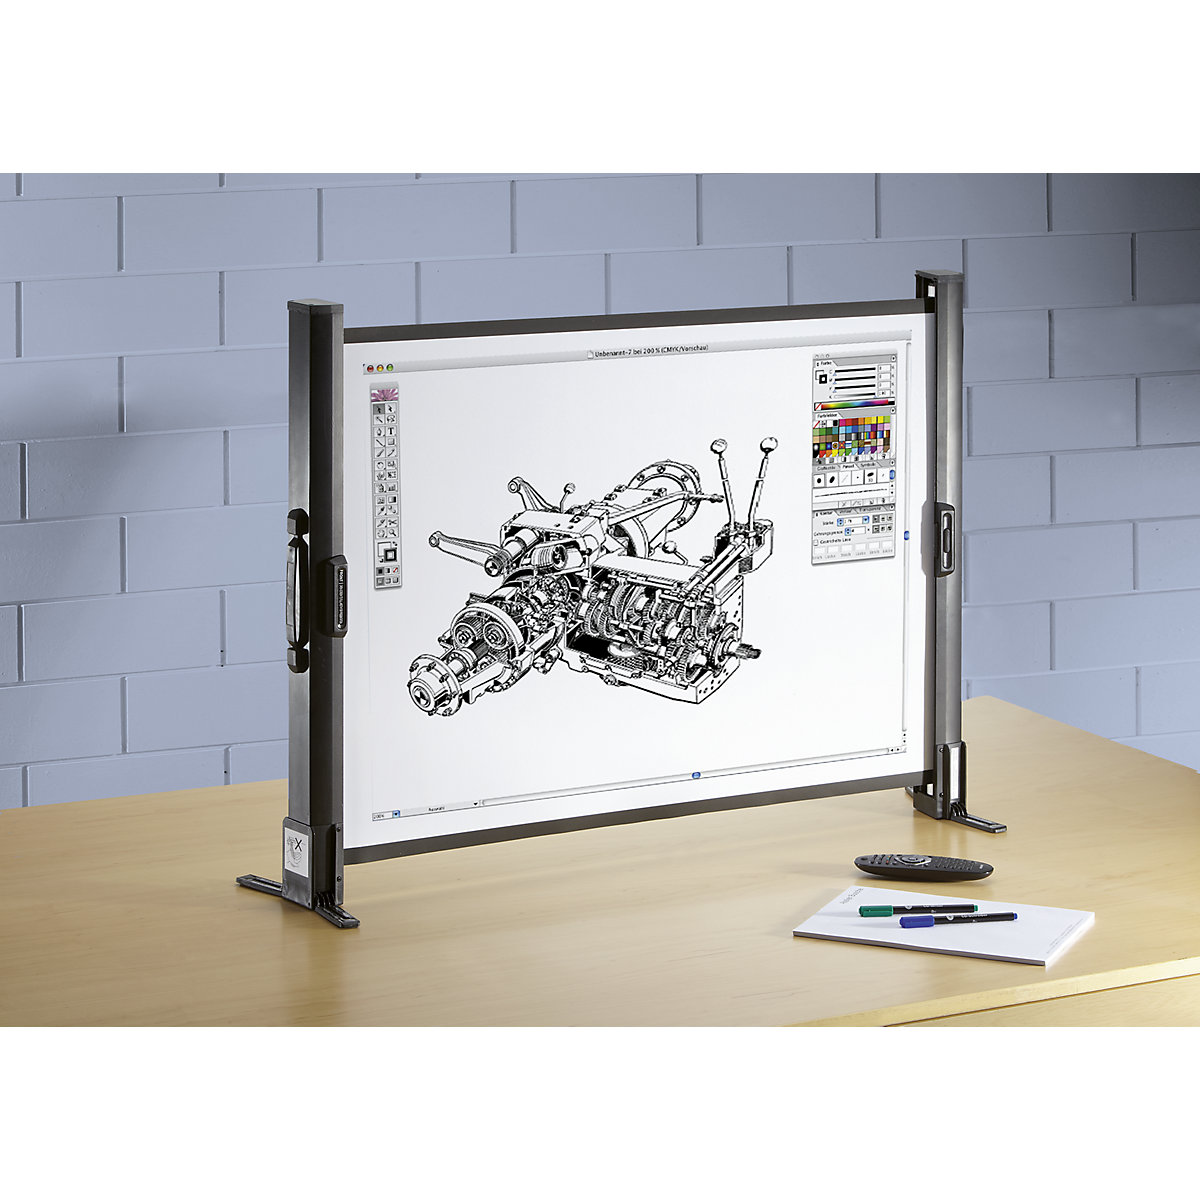 Tabletop projection screen